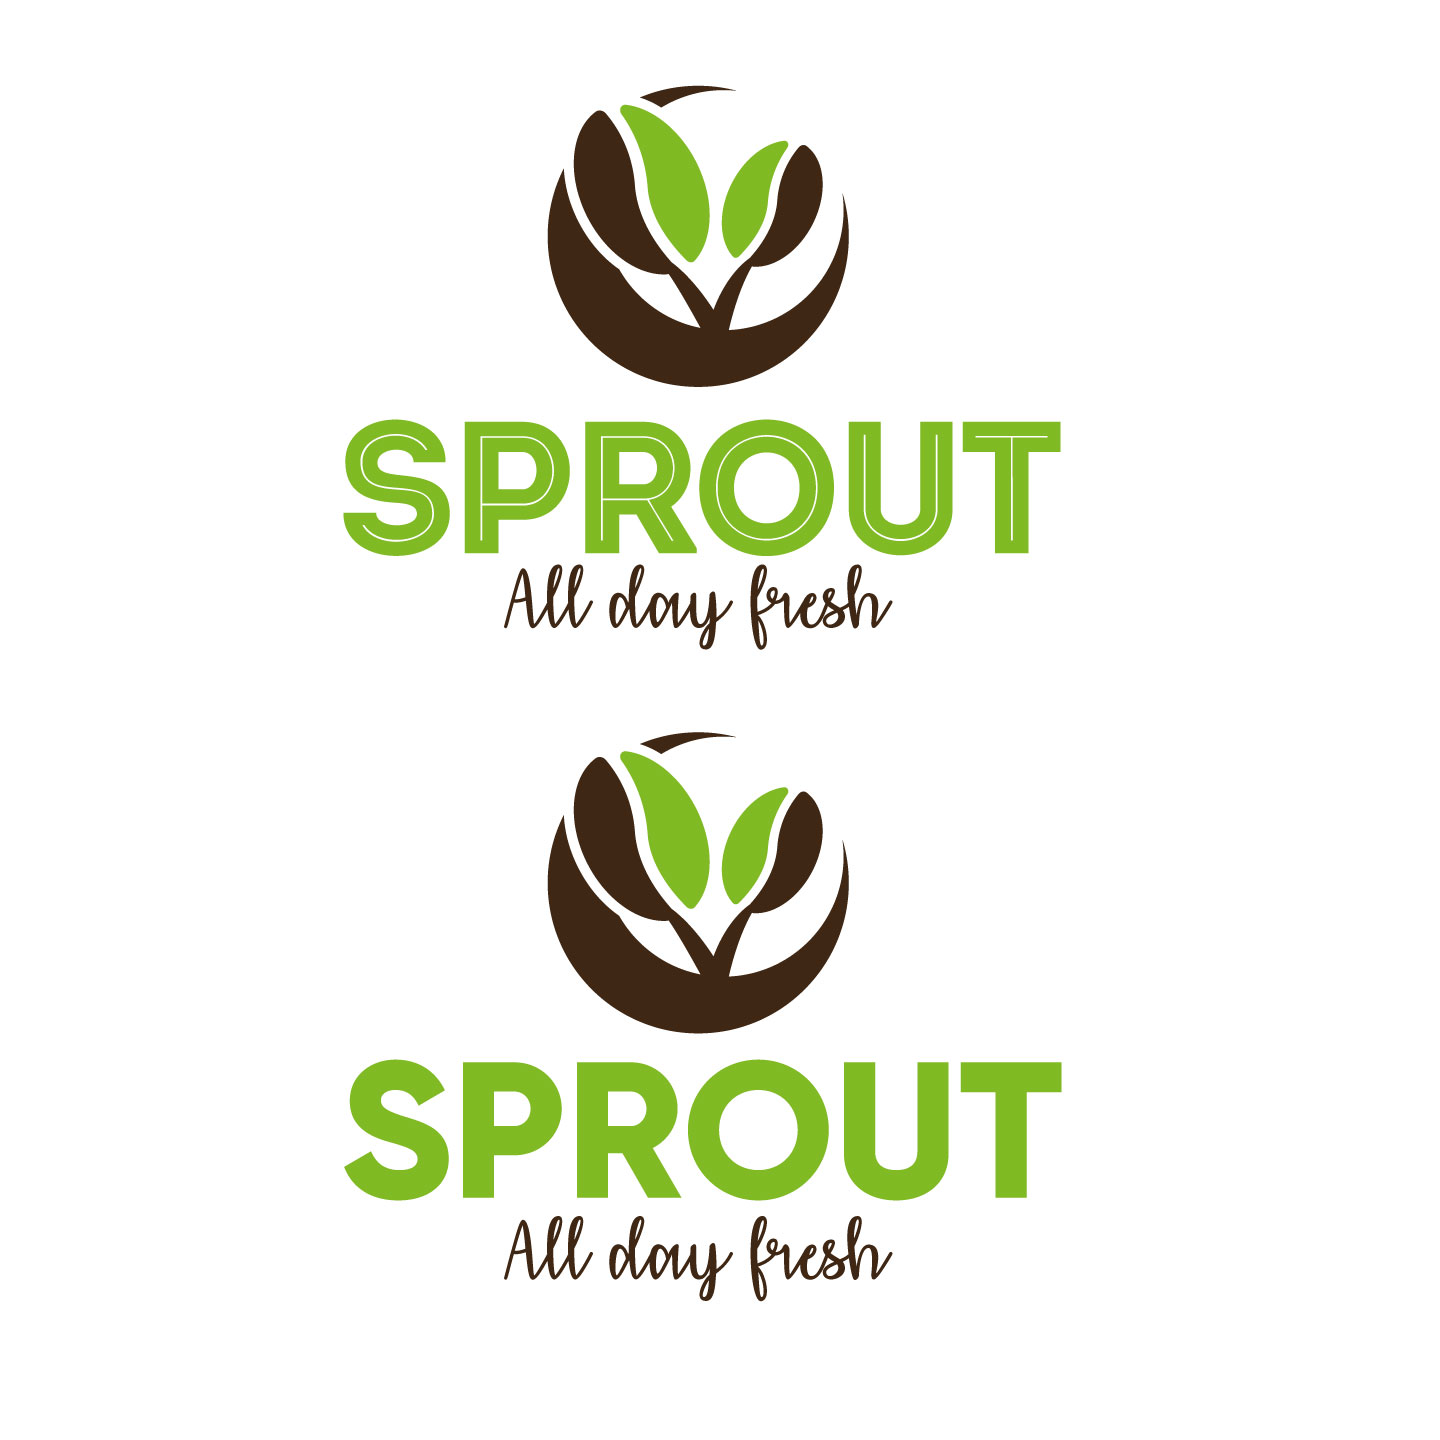 sprout1.jpg